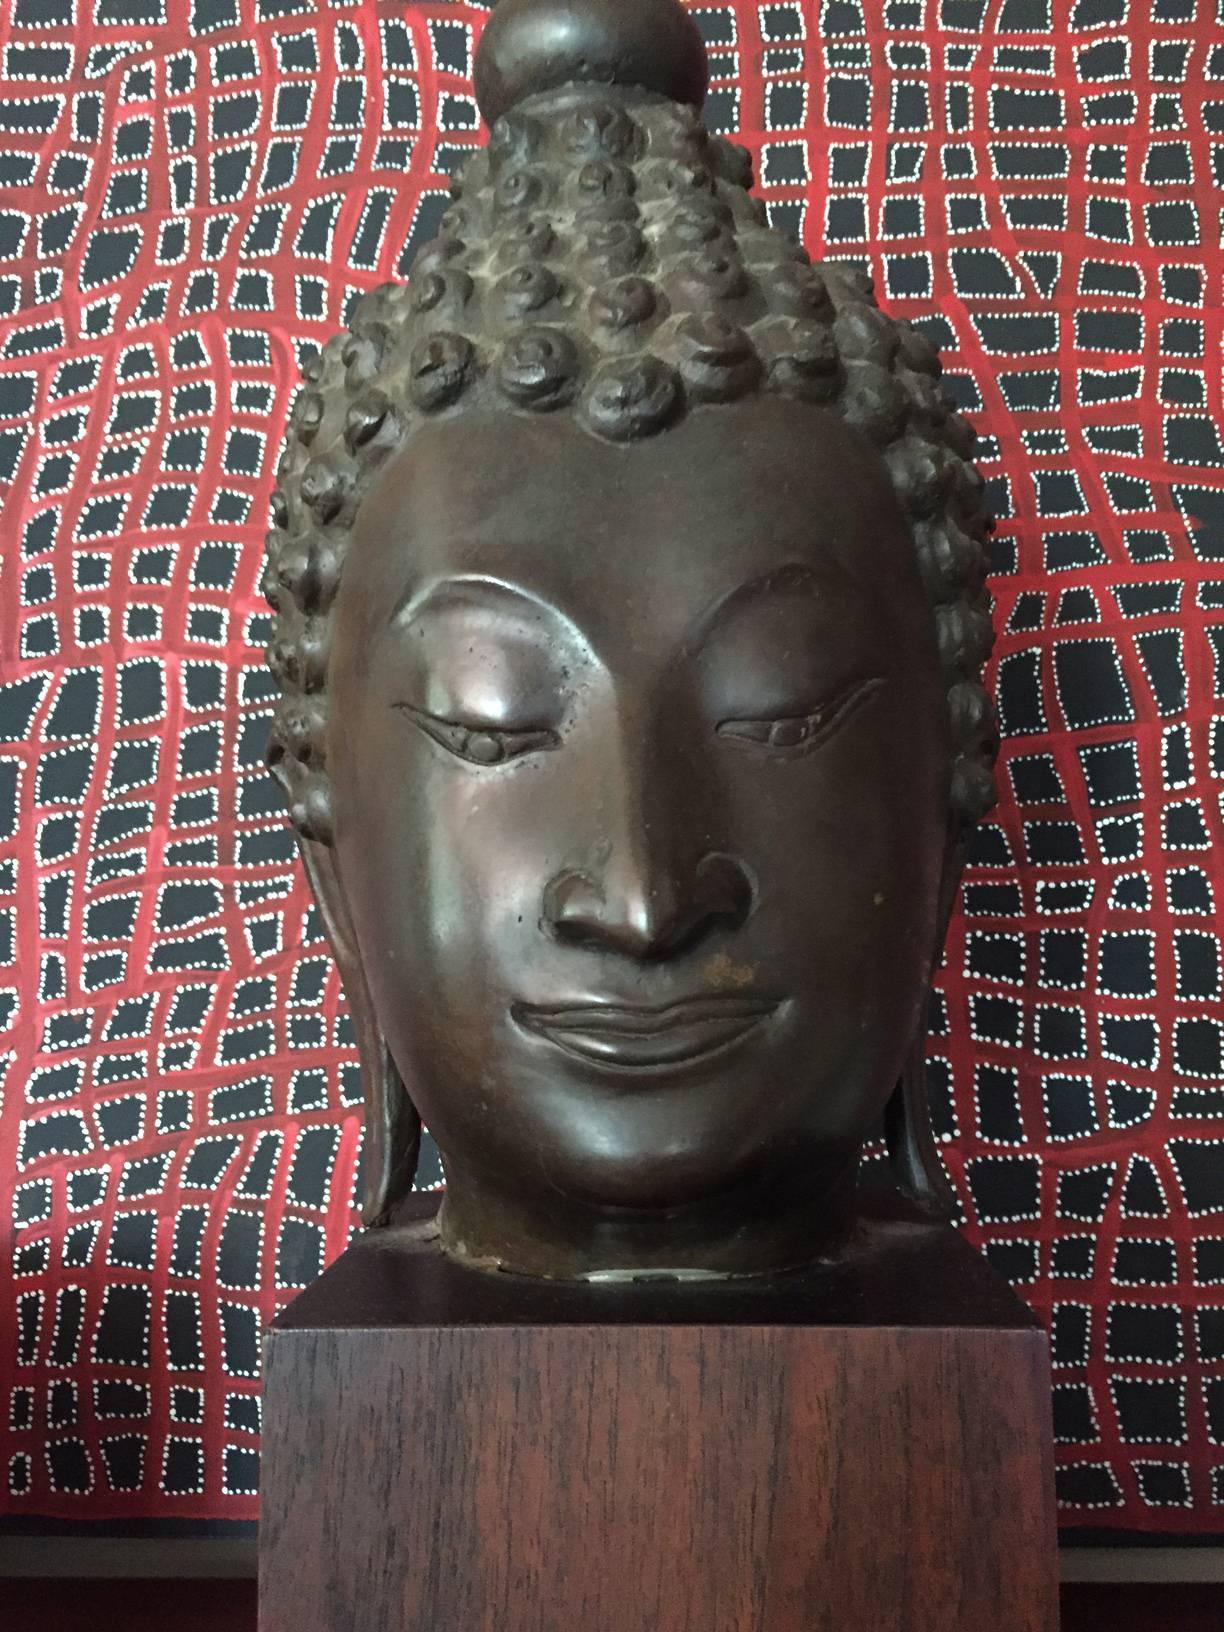 A cast bronze Buddha head fragment mounted on a wood base. Based on the typical facial expression and hair style, this Buddha head was likely from Lana Kingdom in Northern Thailand, likely late 19th century. Heavy patina throughout and chip on the